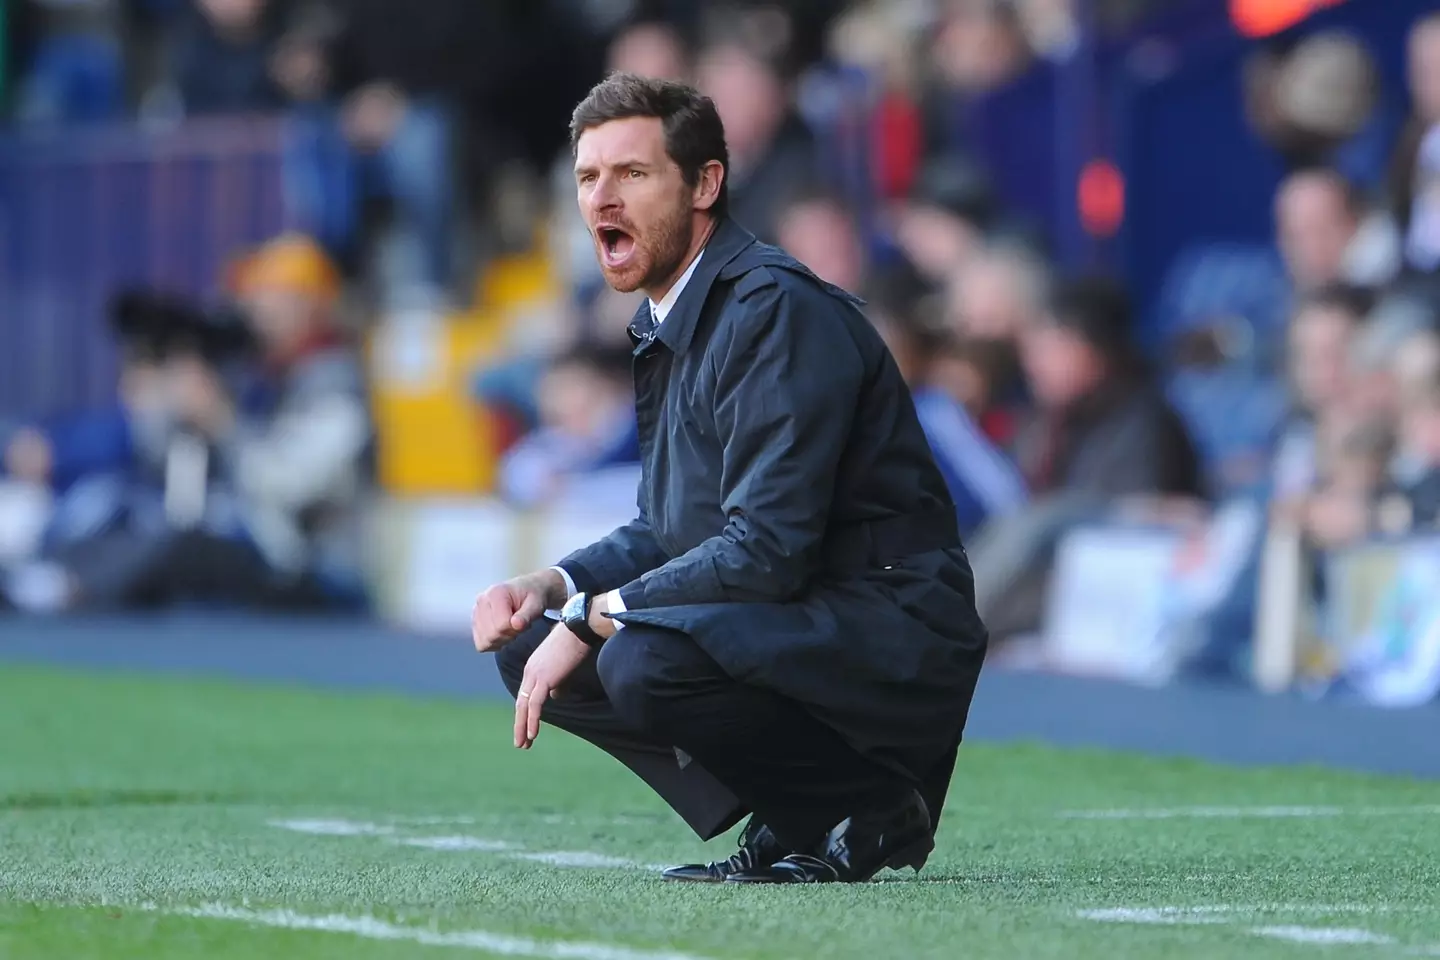 Andre Villas-Boas as Chelsea manager. (Alamy)